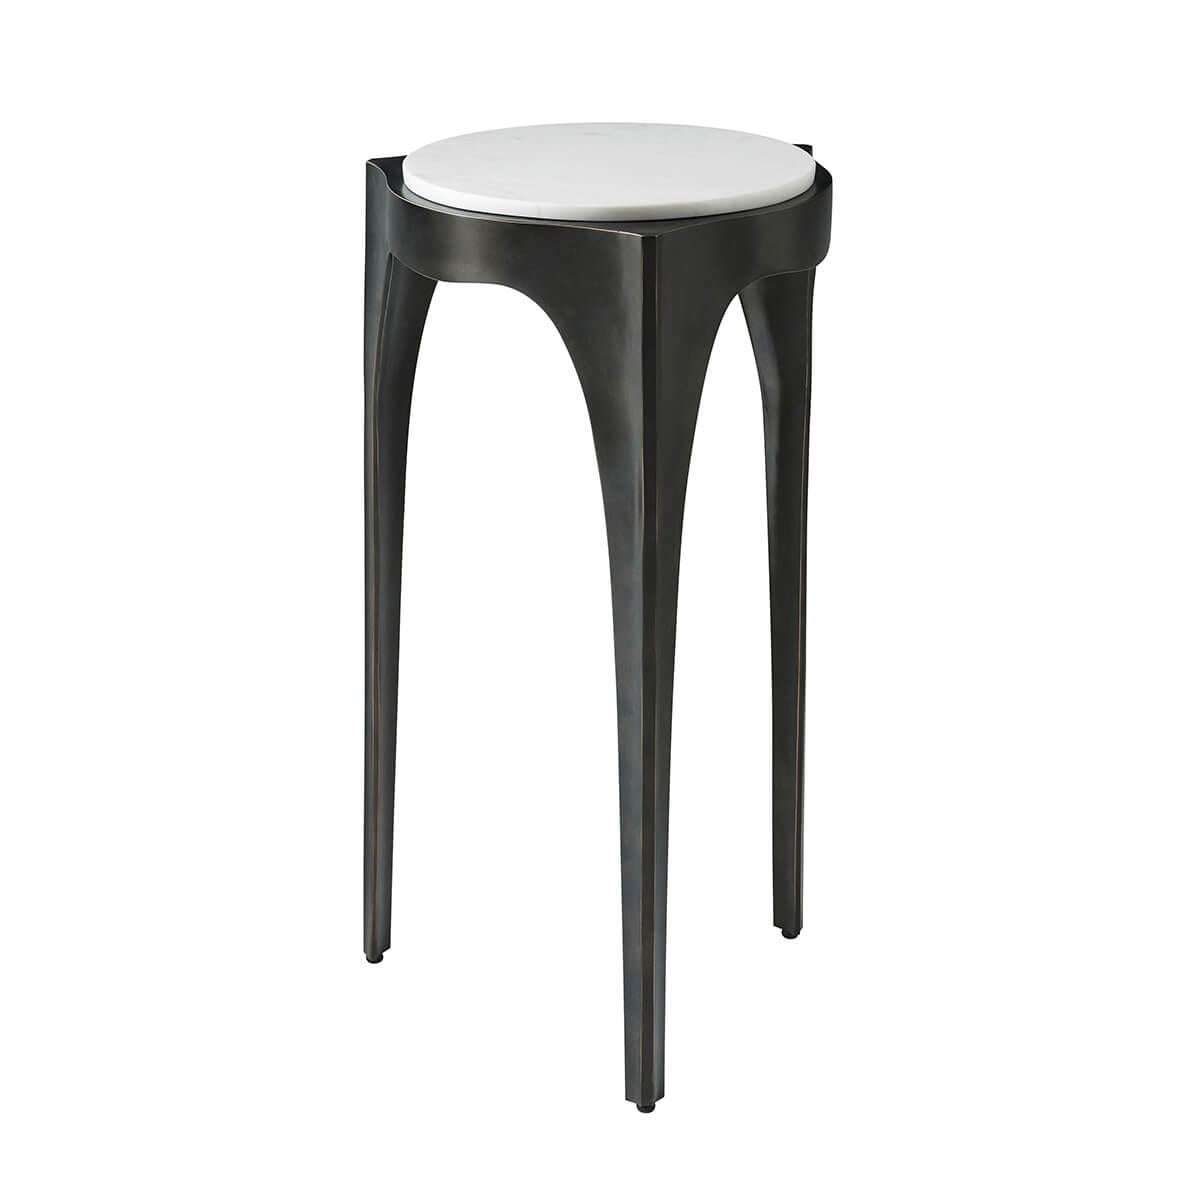 The ideal piece to accompany your relaxation. The raised marble top is set upon an organic three-legged sculptural design and is elegantly featured in a dark Romulous finished metal.

Dimensions: 14.25